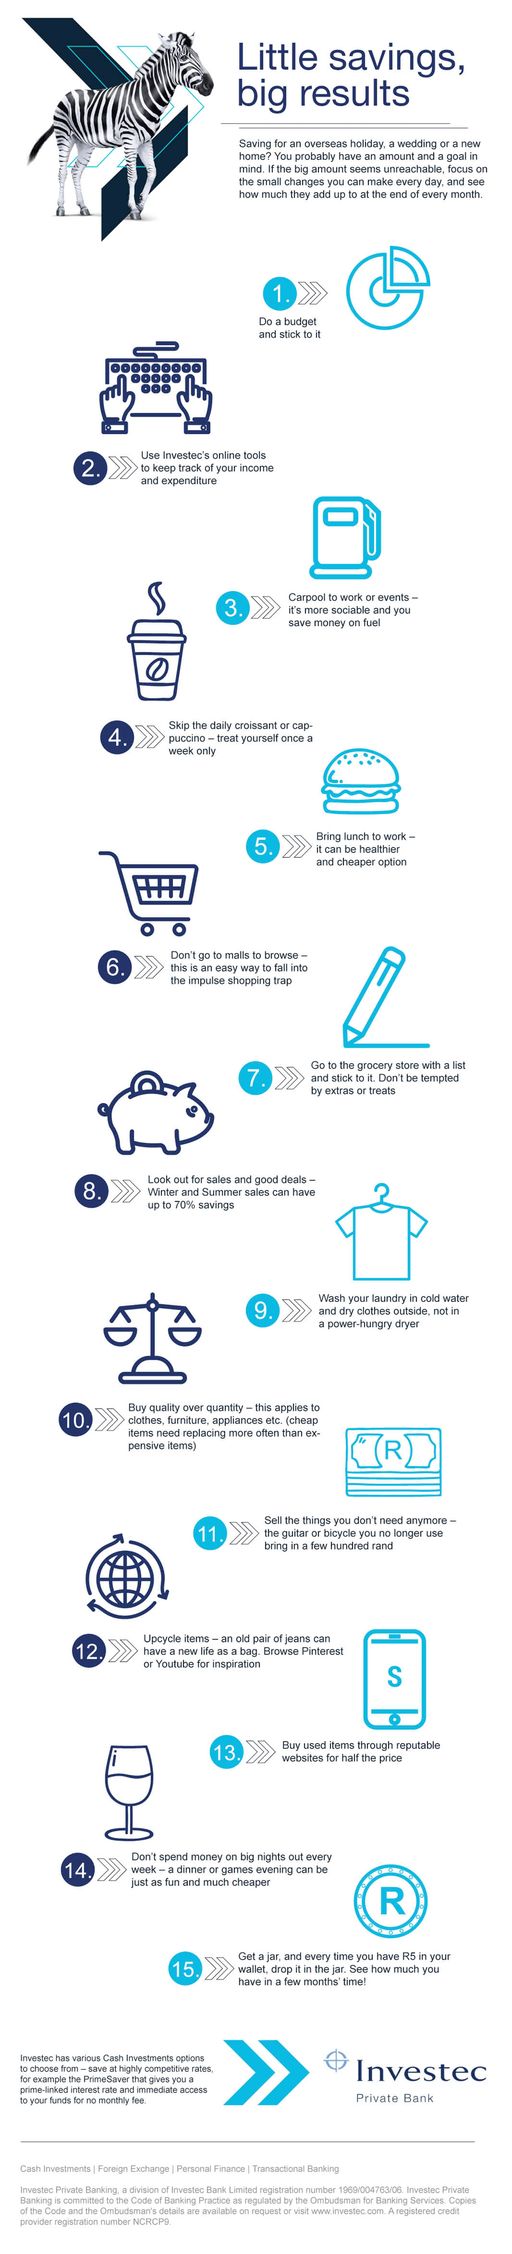 Little savings, big results infographic